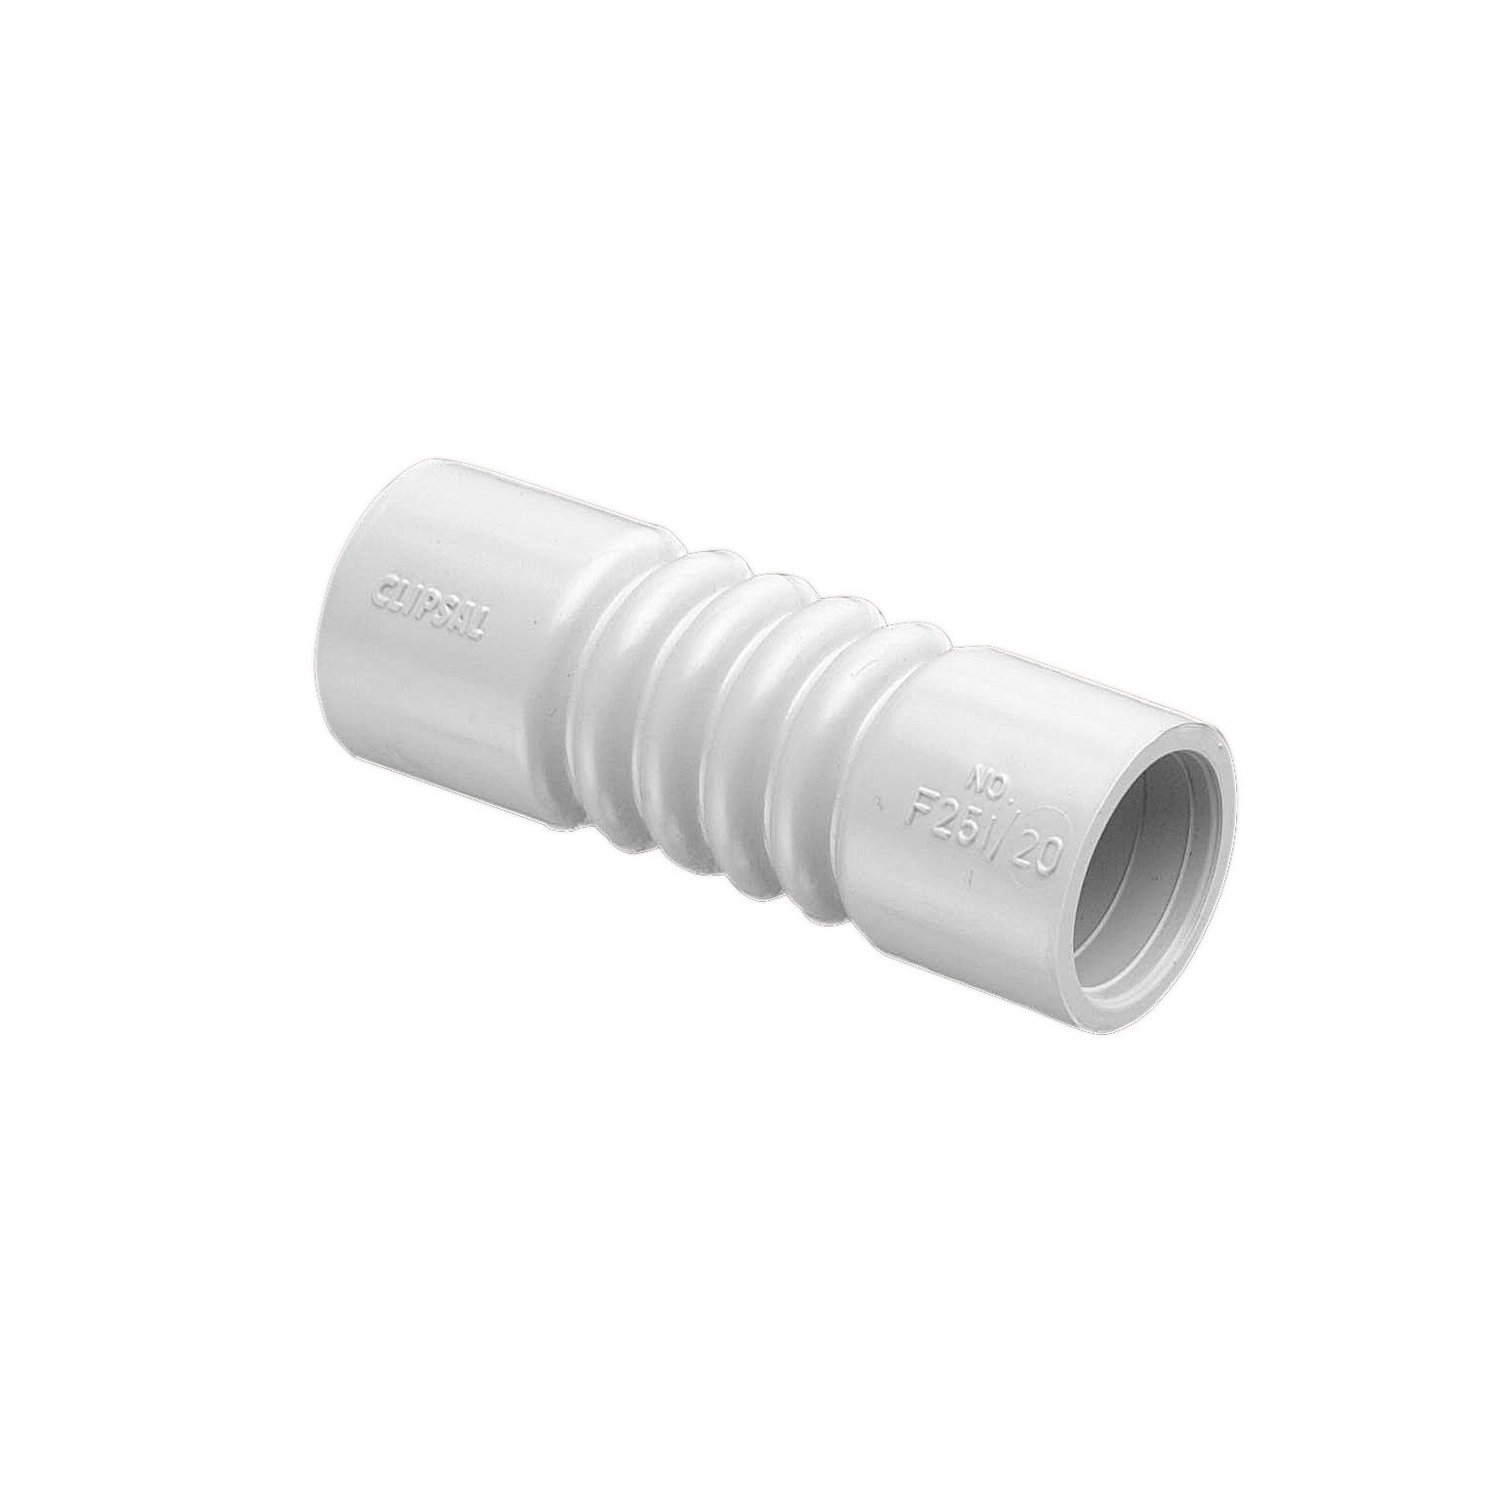 Solid Fittings - PVC, Expansion Couplings - Flexible, 25mm, Grey